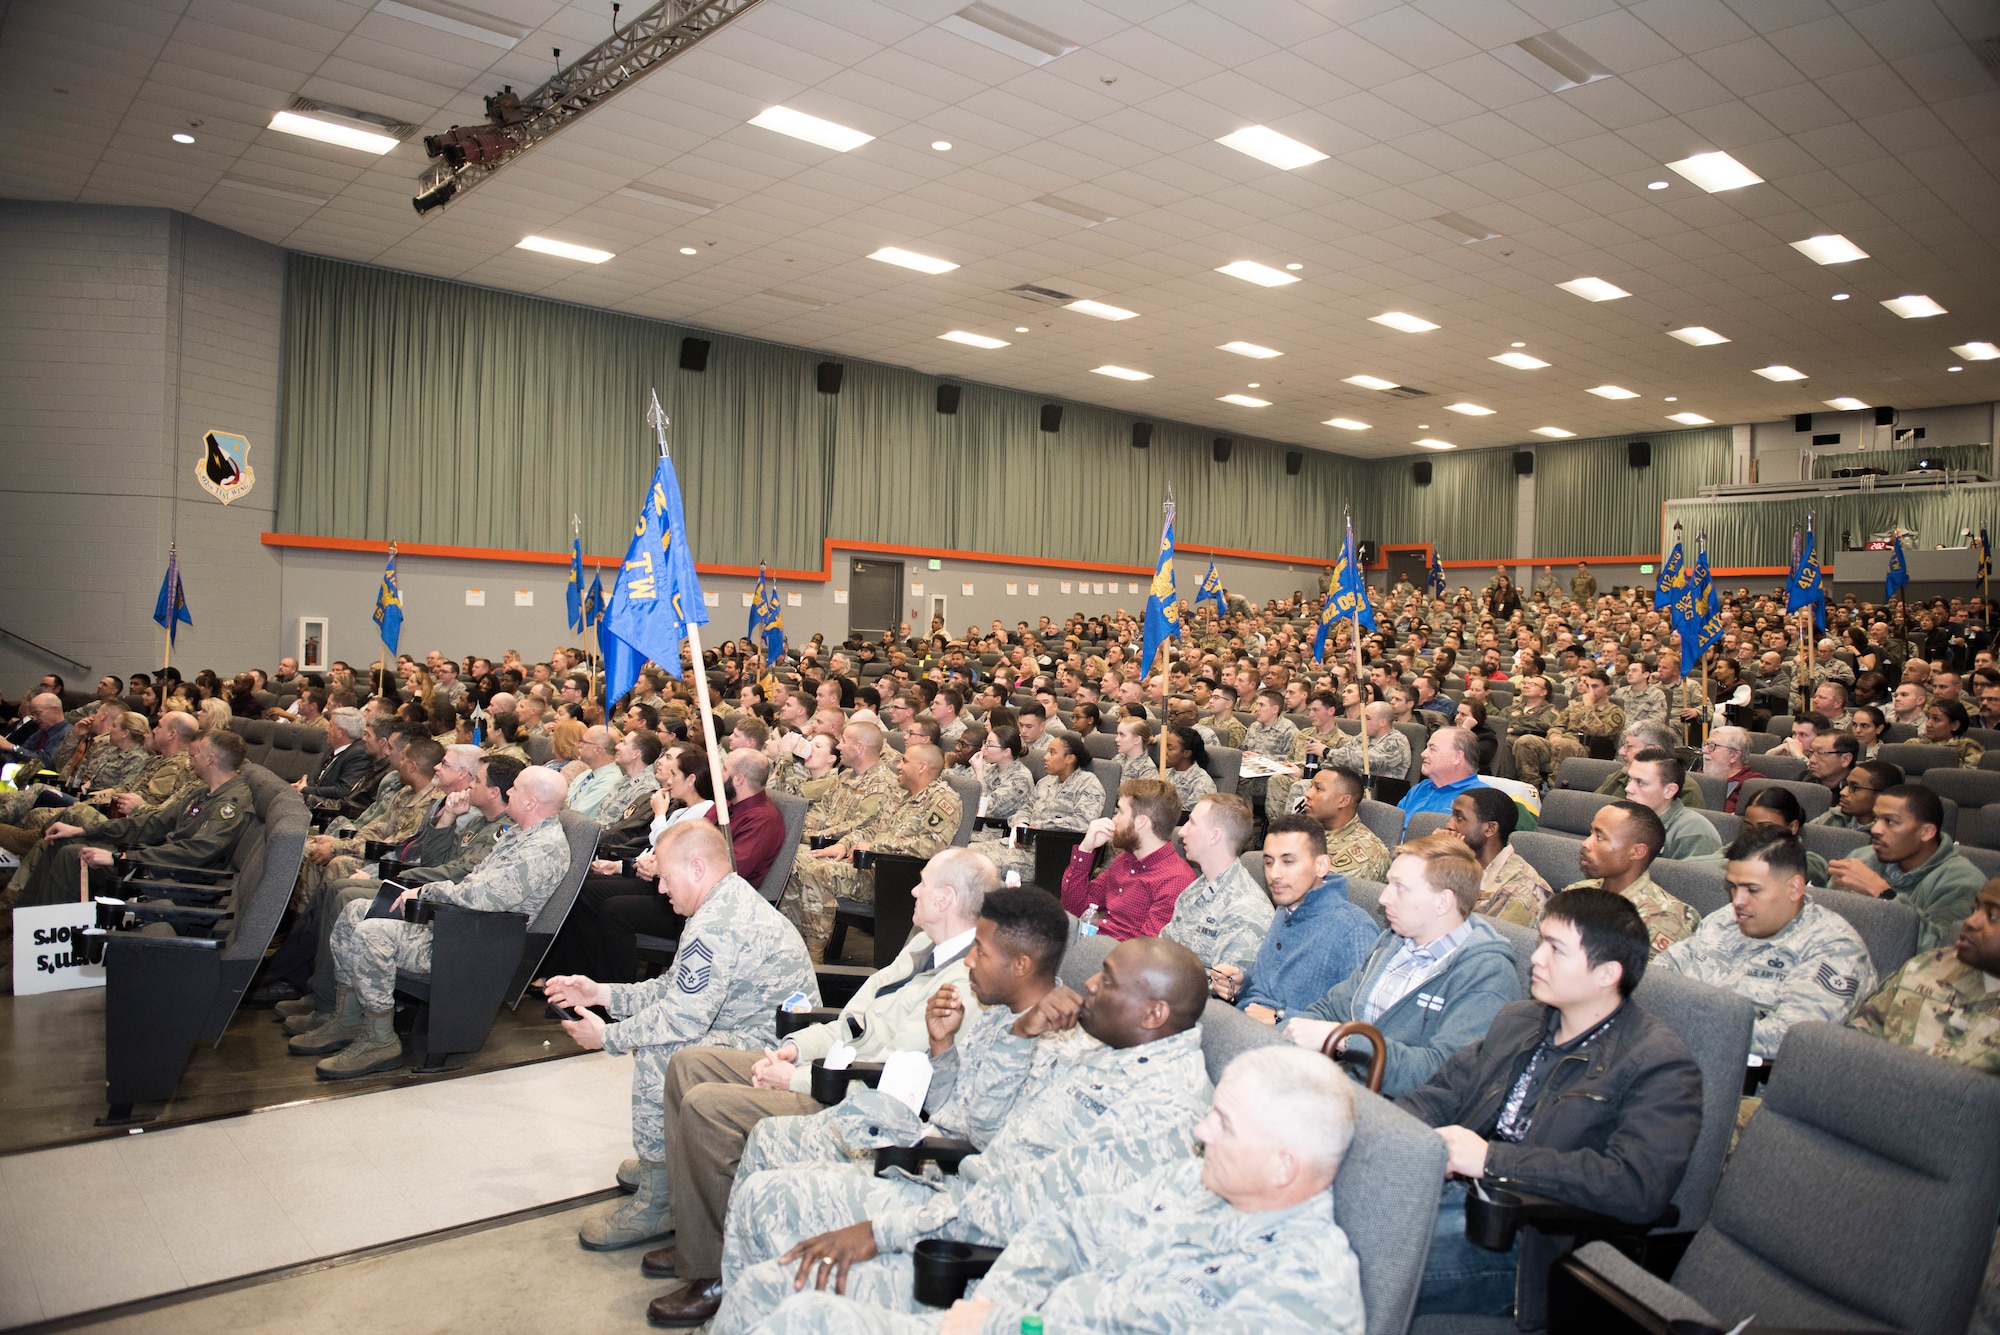 The 2018 412th TW 4th Quarter Awards Ceremony was held in the base theater Jan. 31, 2019. (U.S. Air Force photo by Joe Jones)